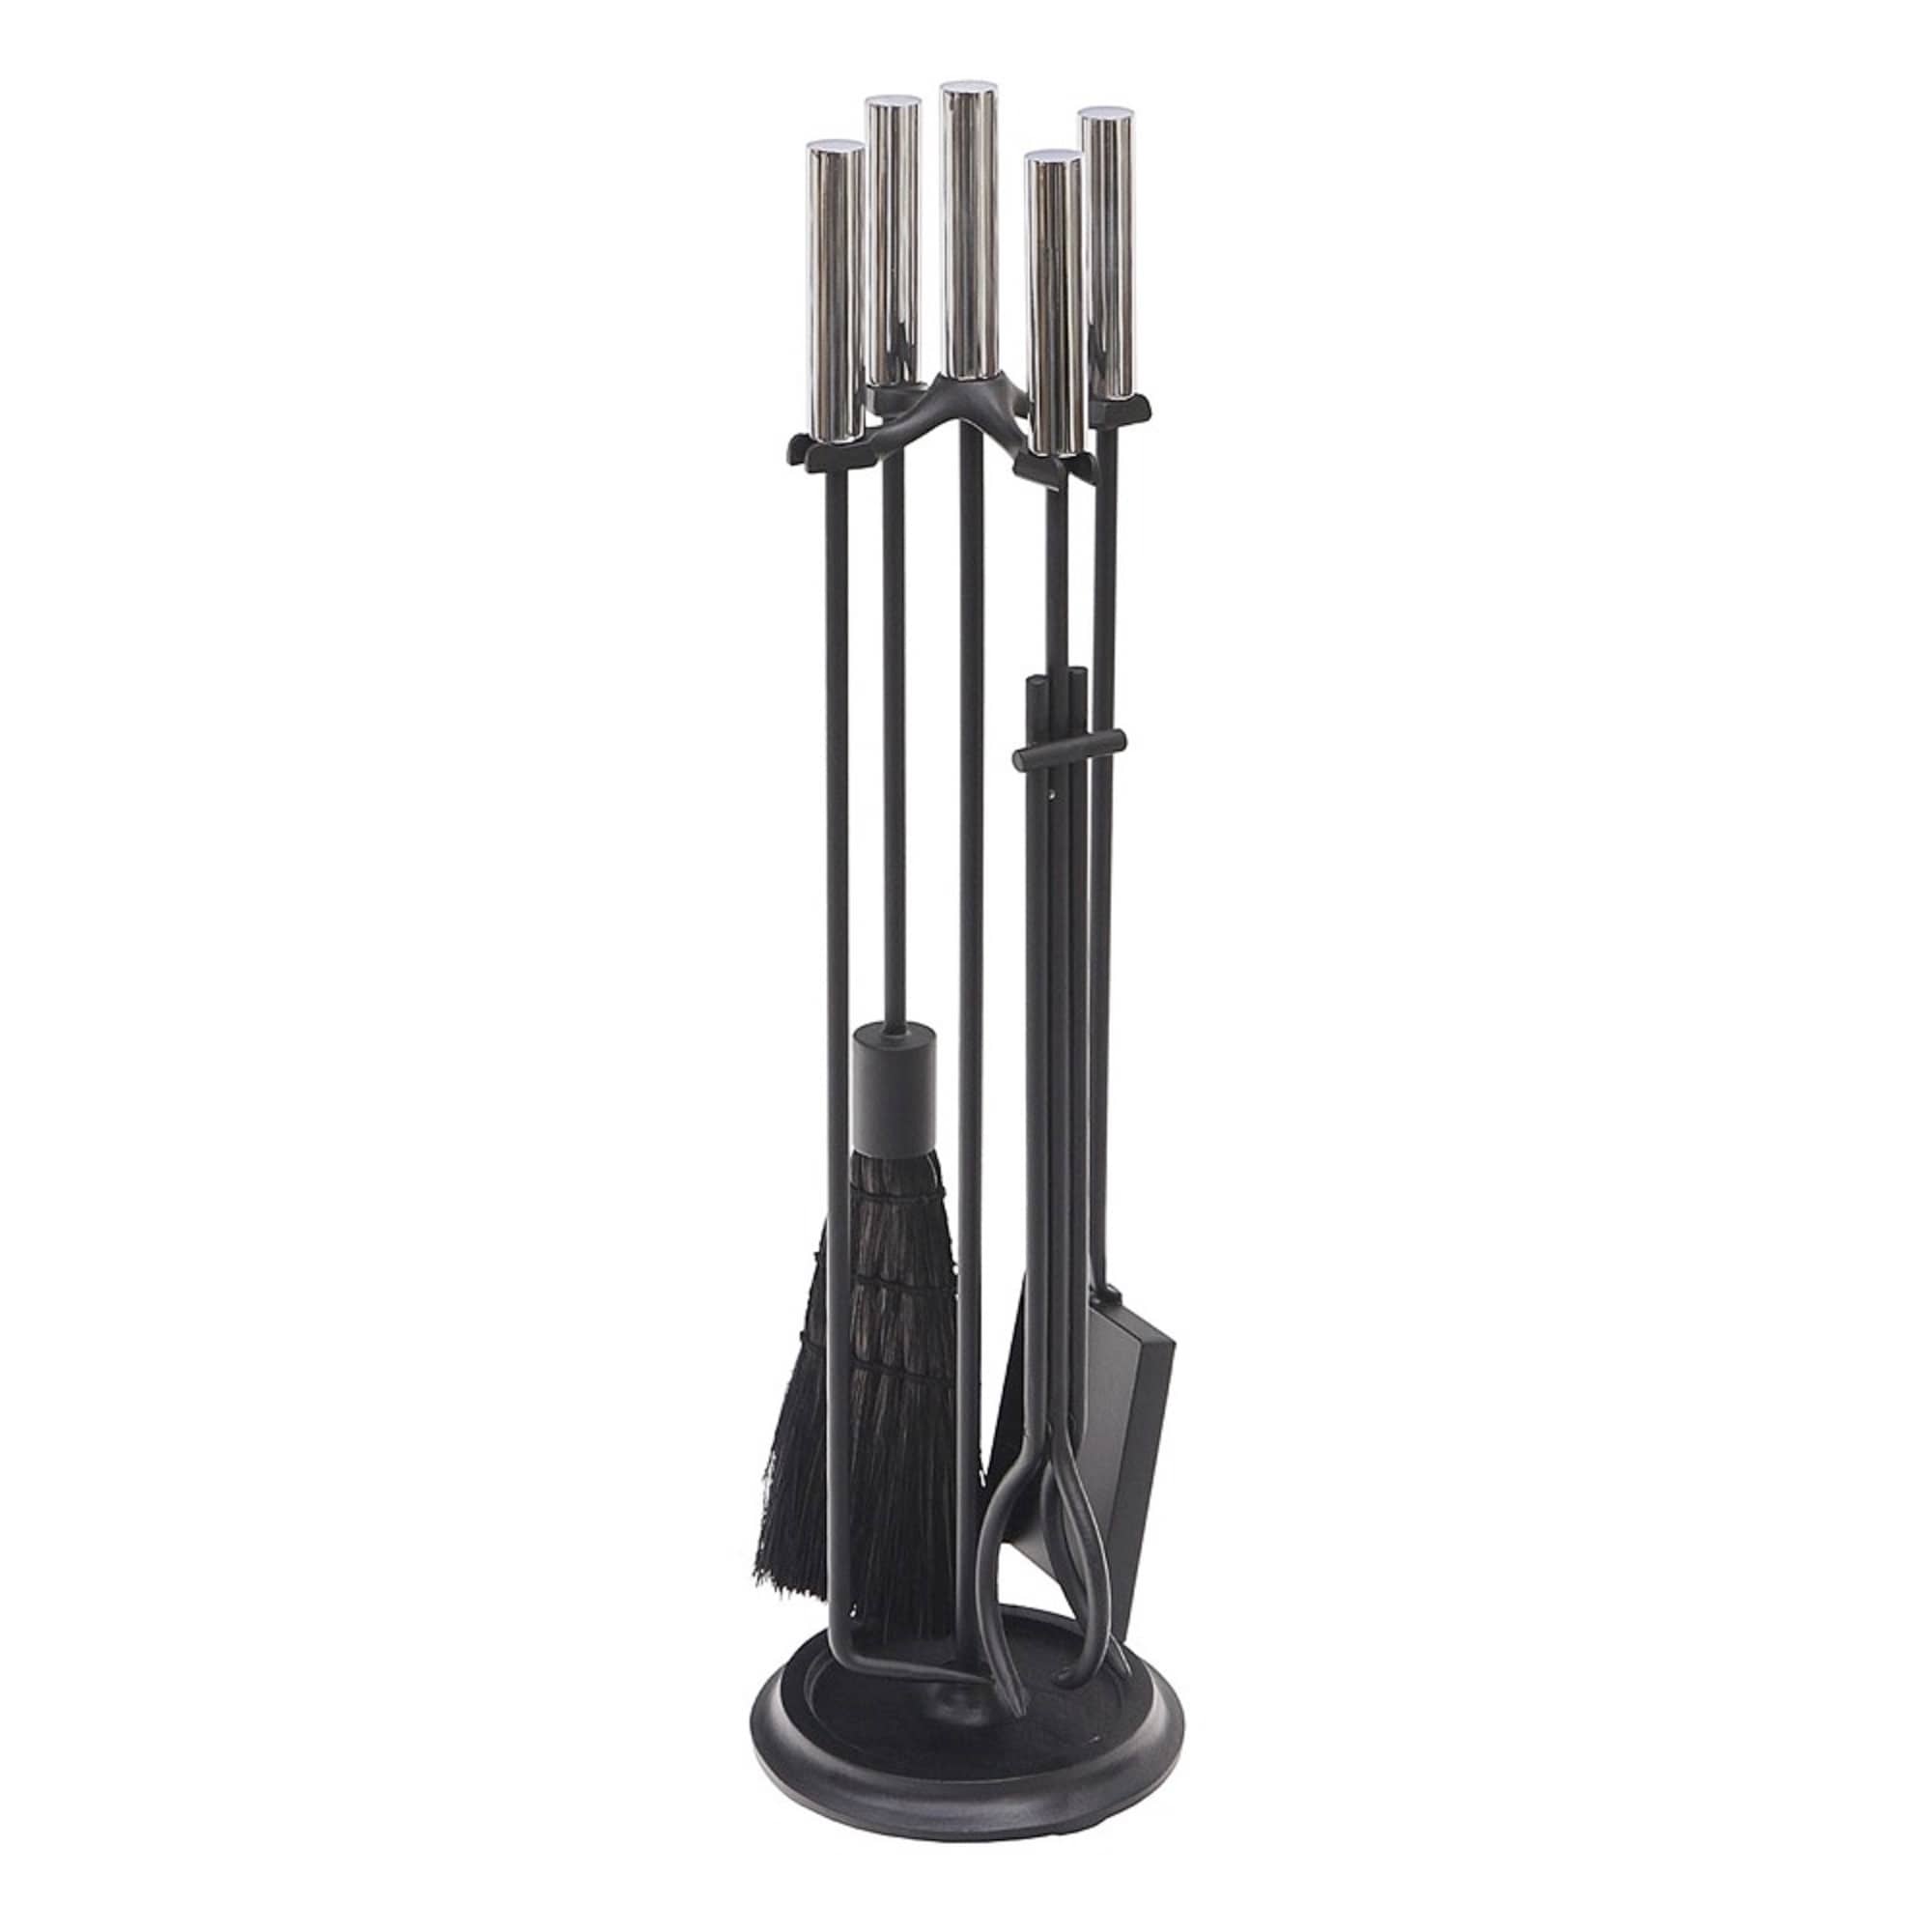 Minuteman International Contemporary Bedford Fireplace Set of 4 Tools, 30.25 Inch Tall, Black and Polished Chrome